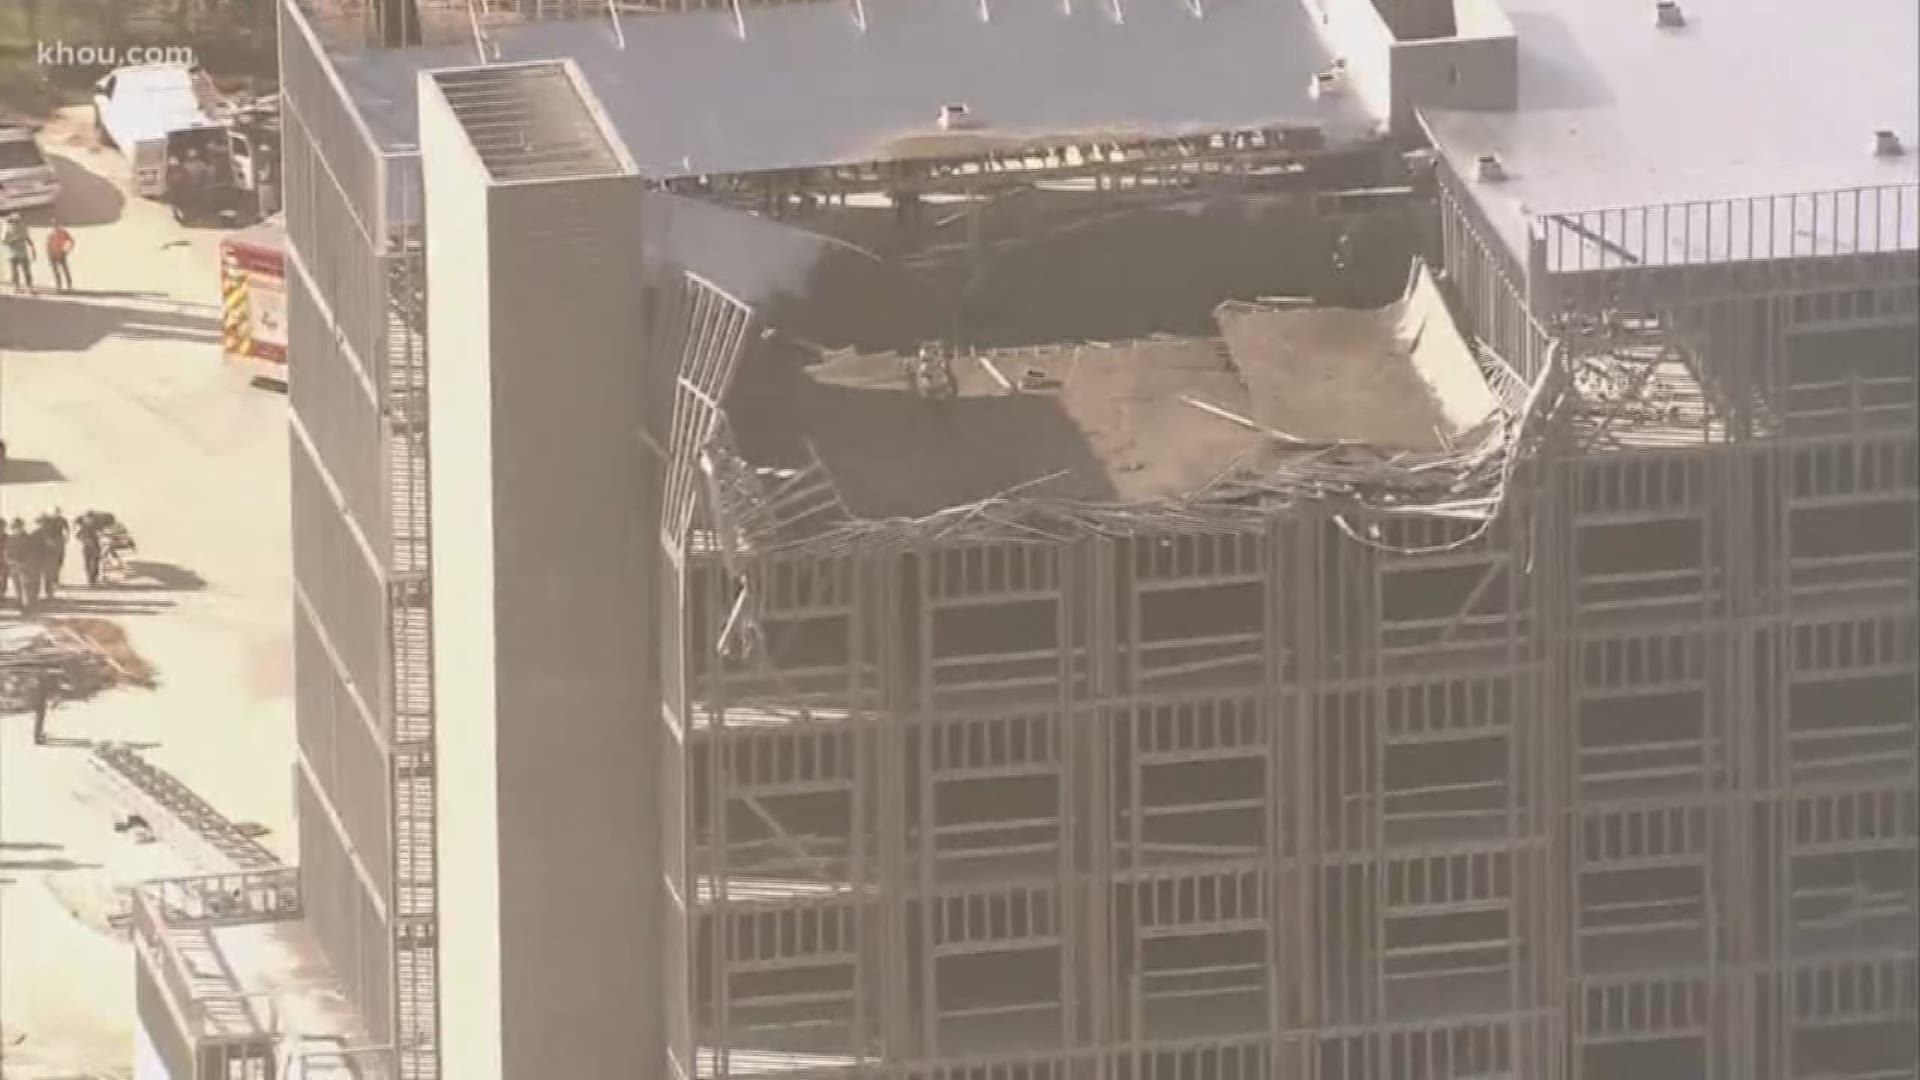 Nine people were taken to the hospital after a roof collapsed at a hotel under construction. The workers suffered minor injuries.